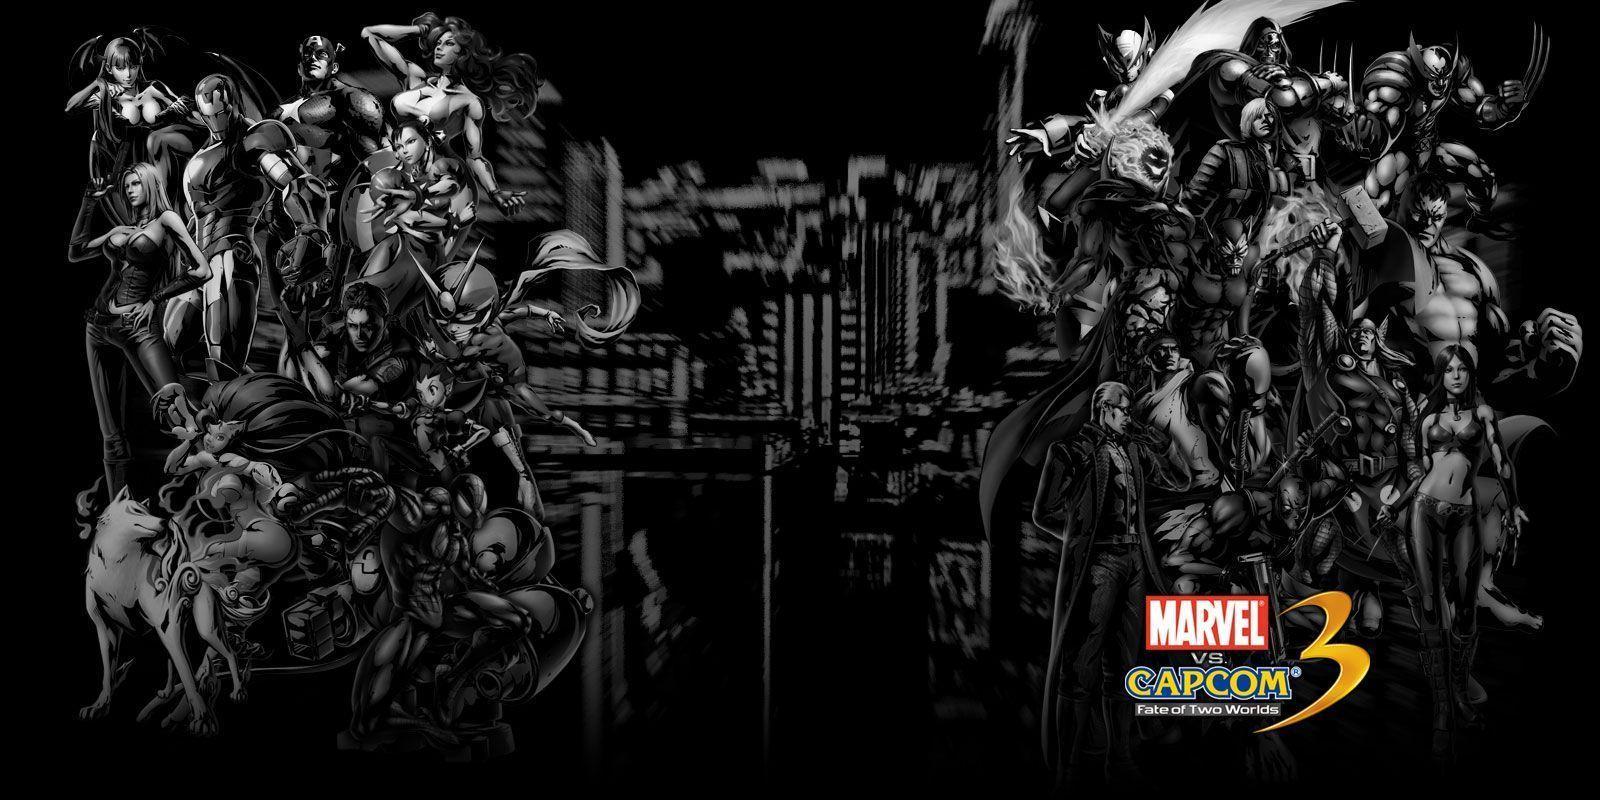 Marvel Vs Capcom 3: Fate of Two Worlds Wallpapers For PS3